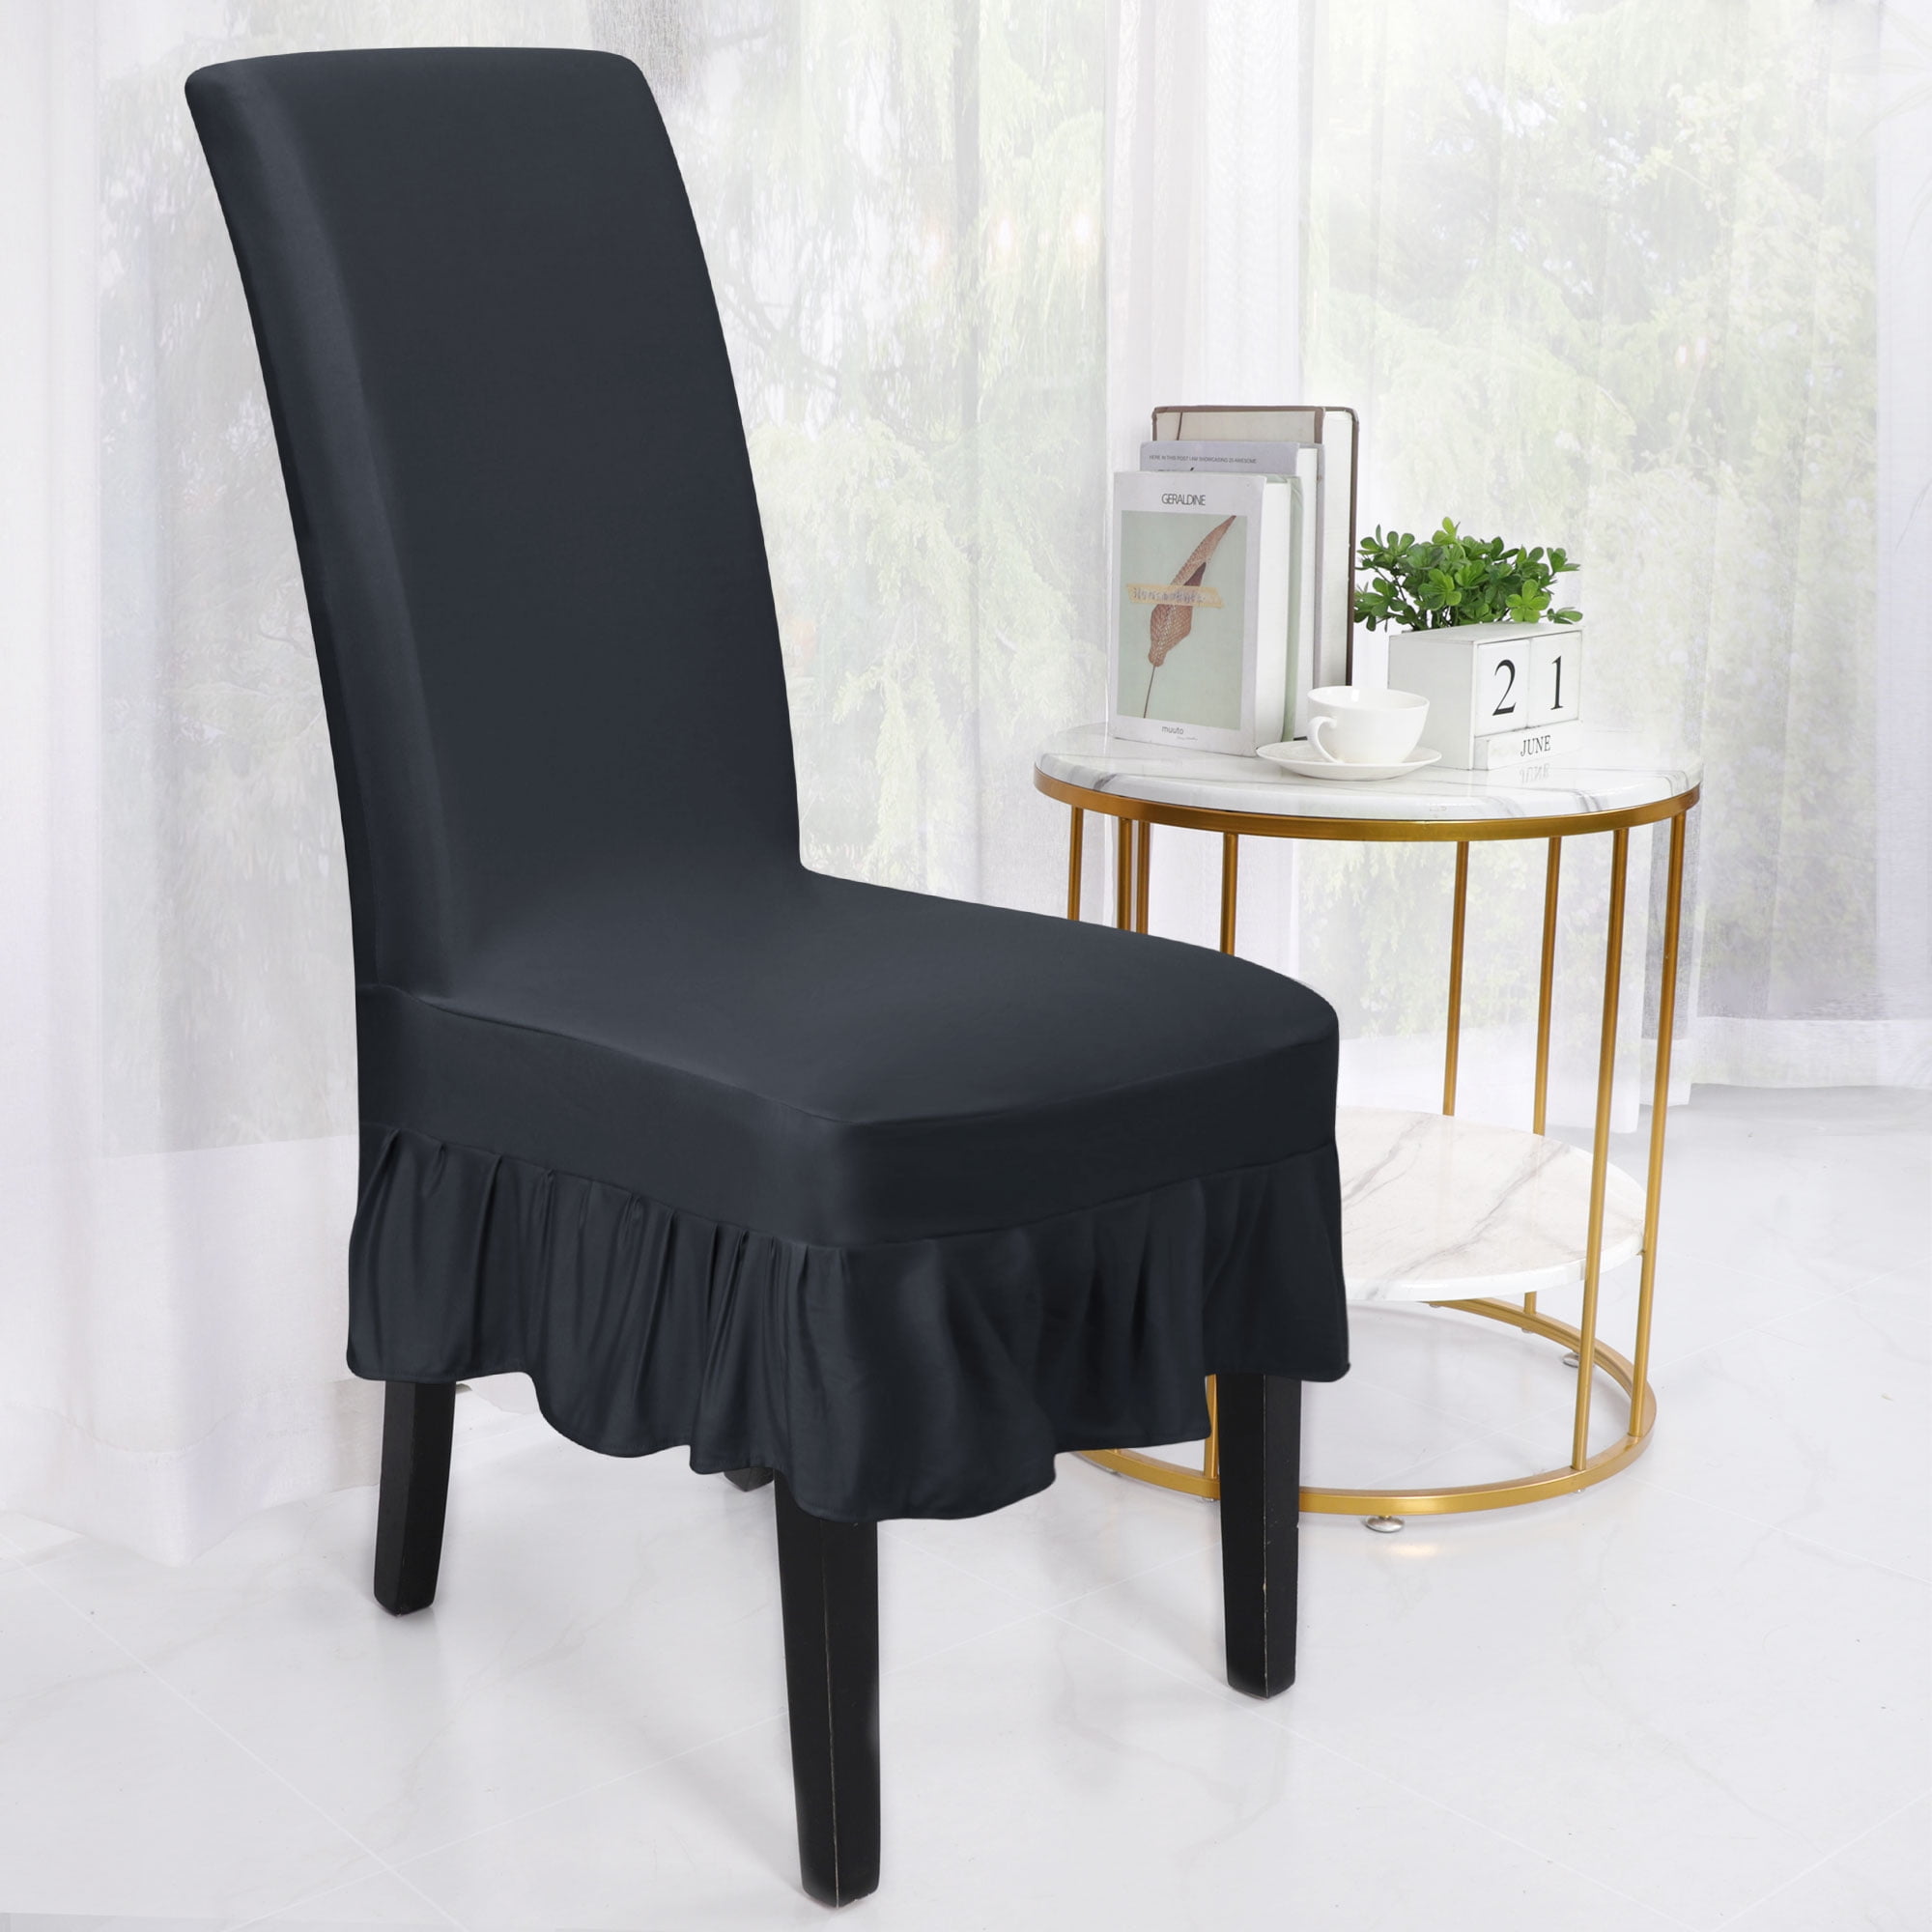 Details about   Dining Universal Chair Cover Cover Protective Removable Stretch Slipcovers Chair 